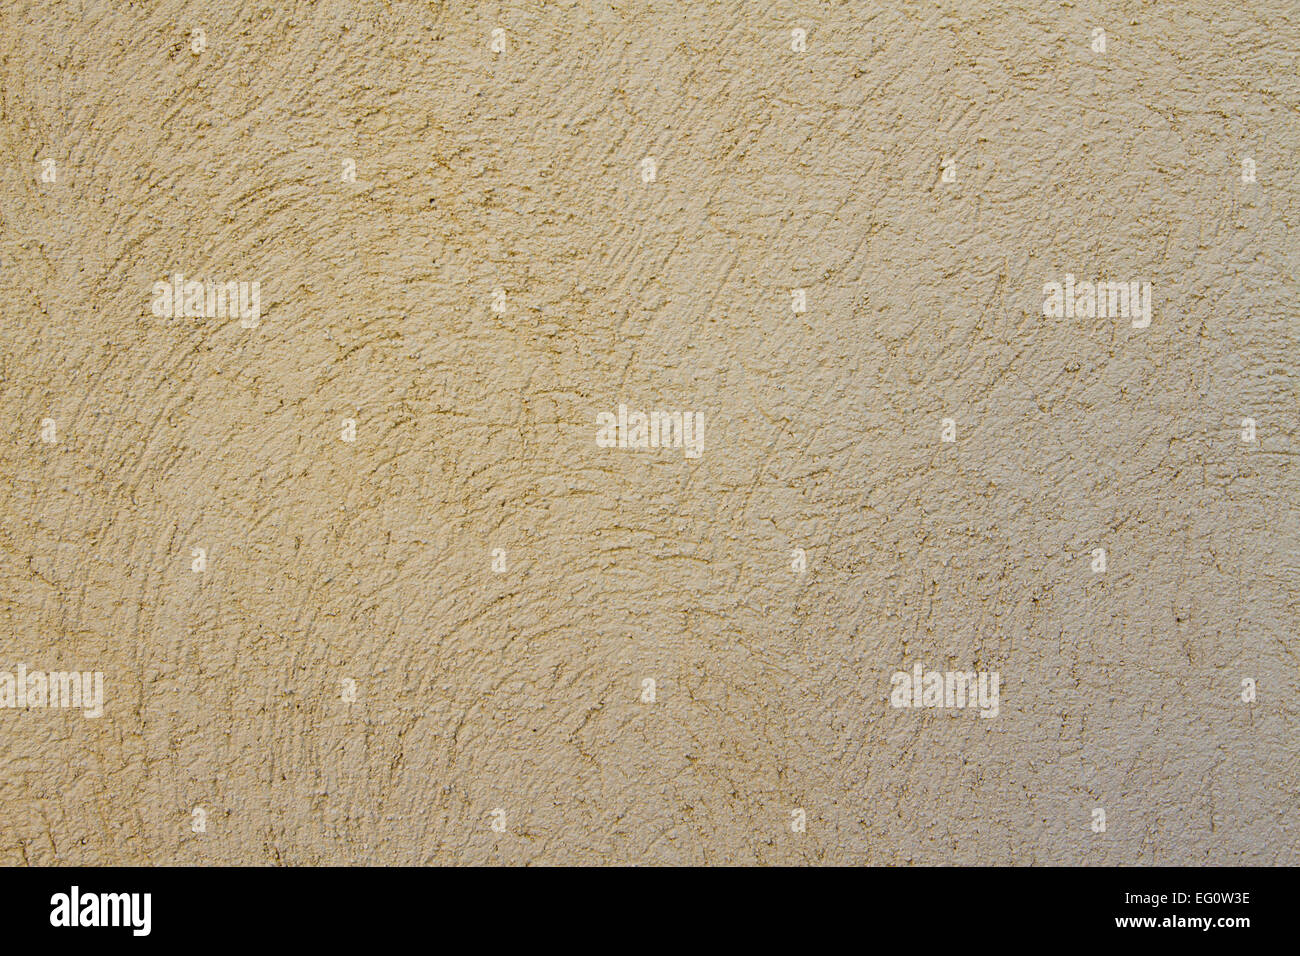 Beige grunge wall image of a textured concrete wall. It's a brown / beige colored background. Stock Photo